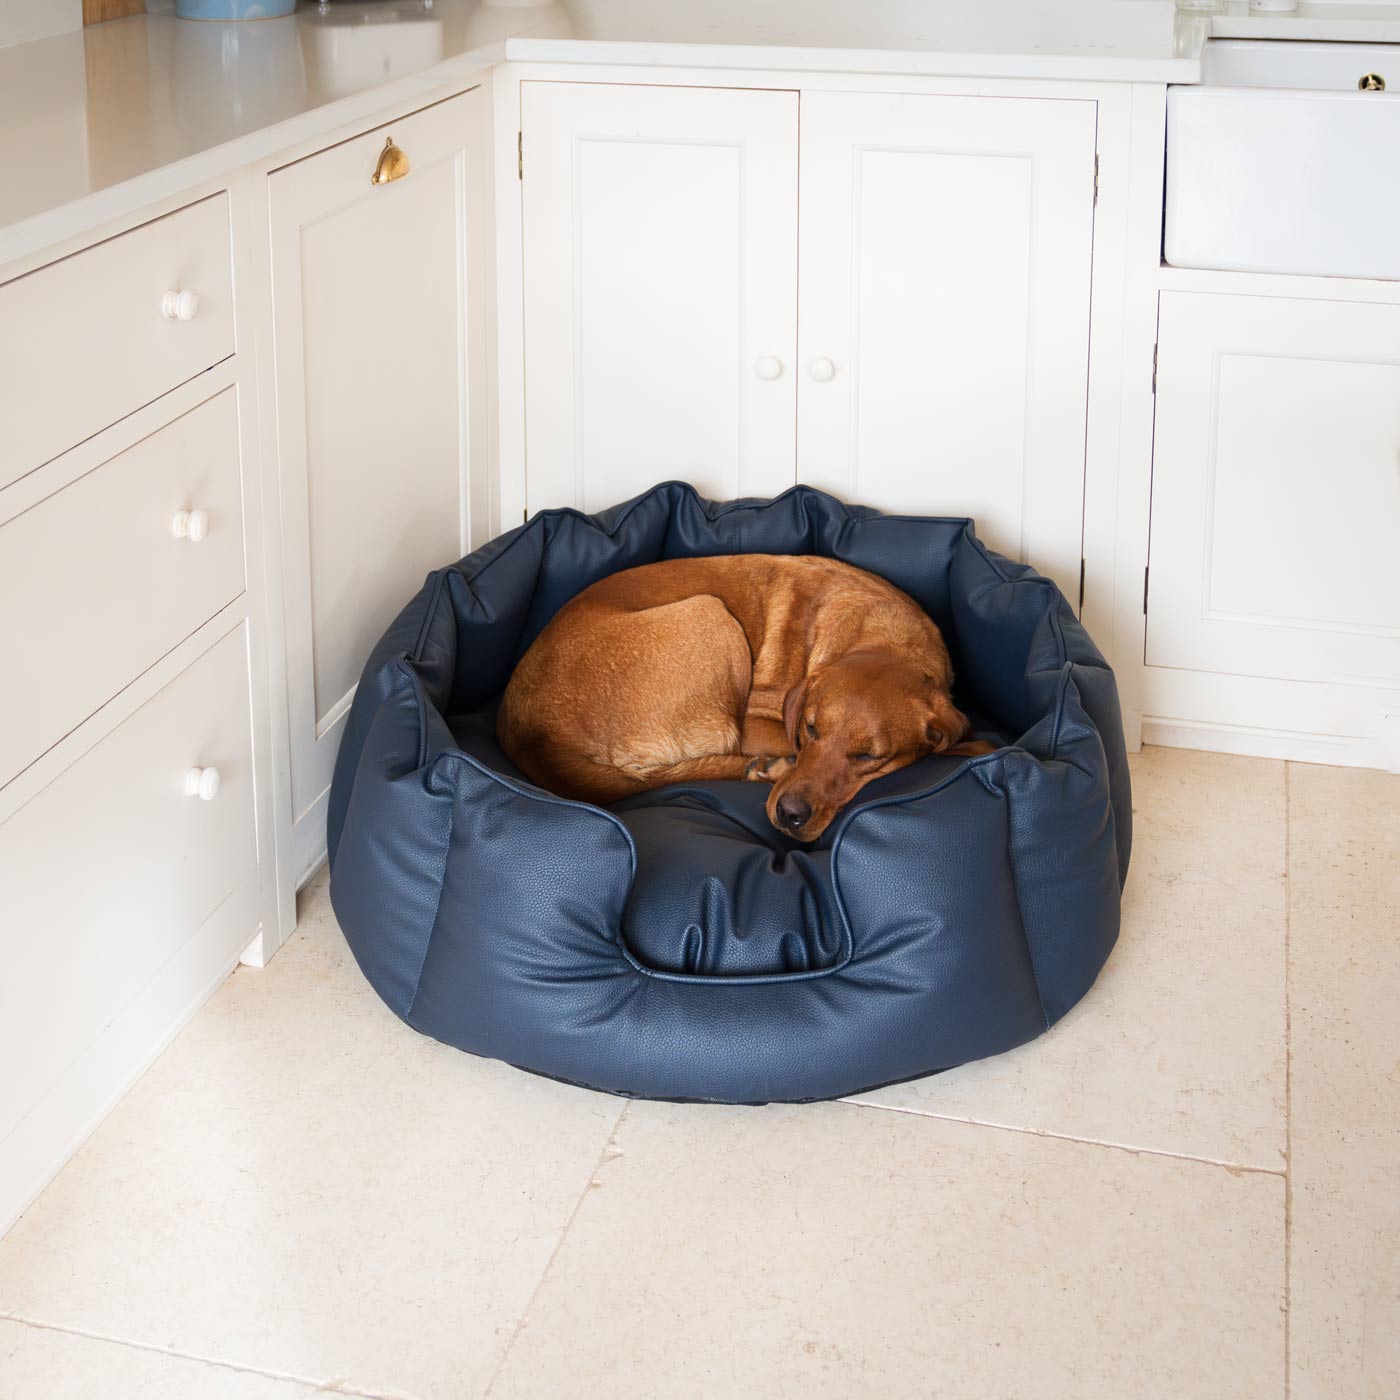 Luxury Handmade High Wall in Rhino Tough Faux Leather, in Pacific, Perfect For Your Pets Nap Time! Available To Personalise at Lords & Labradors